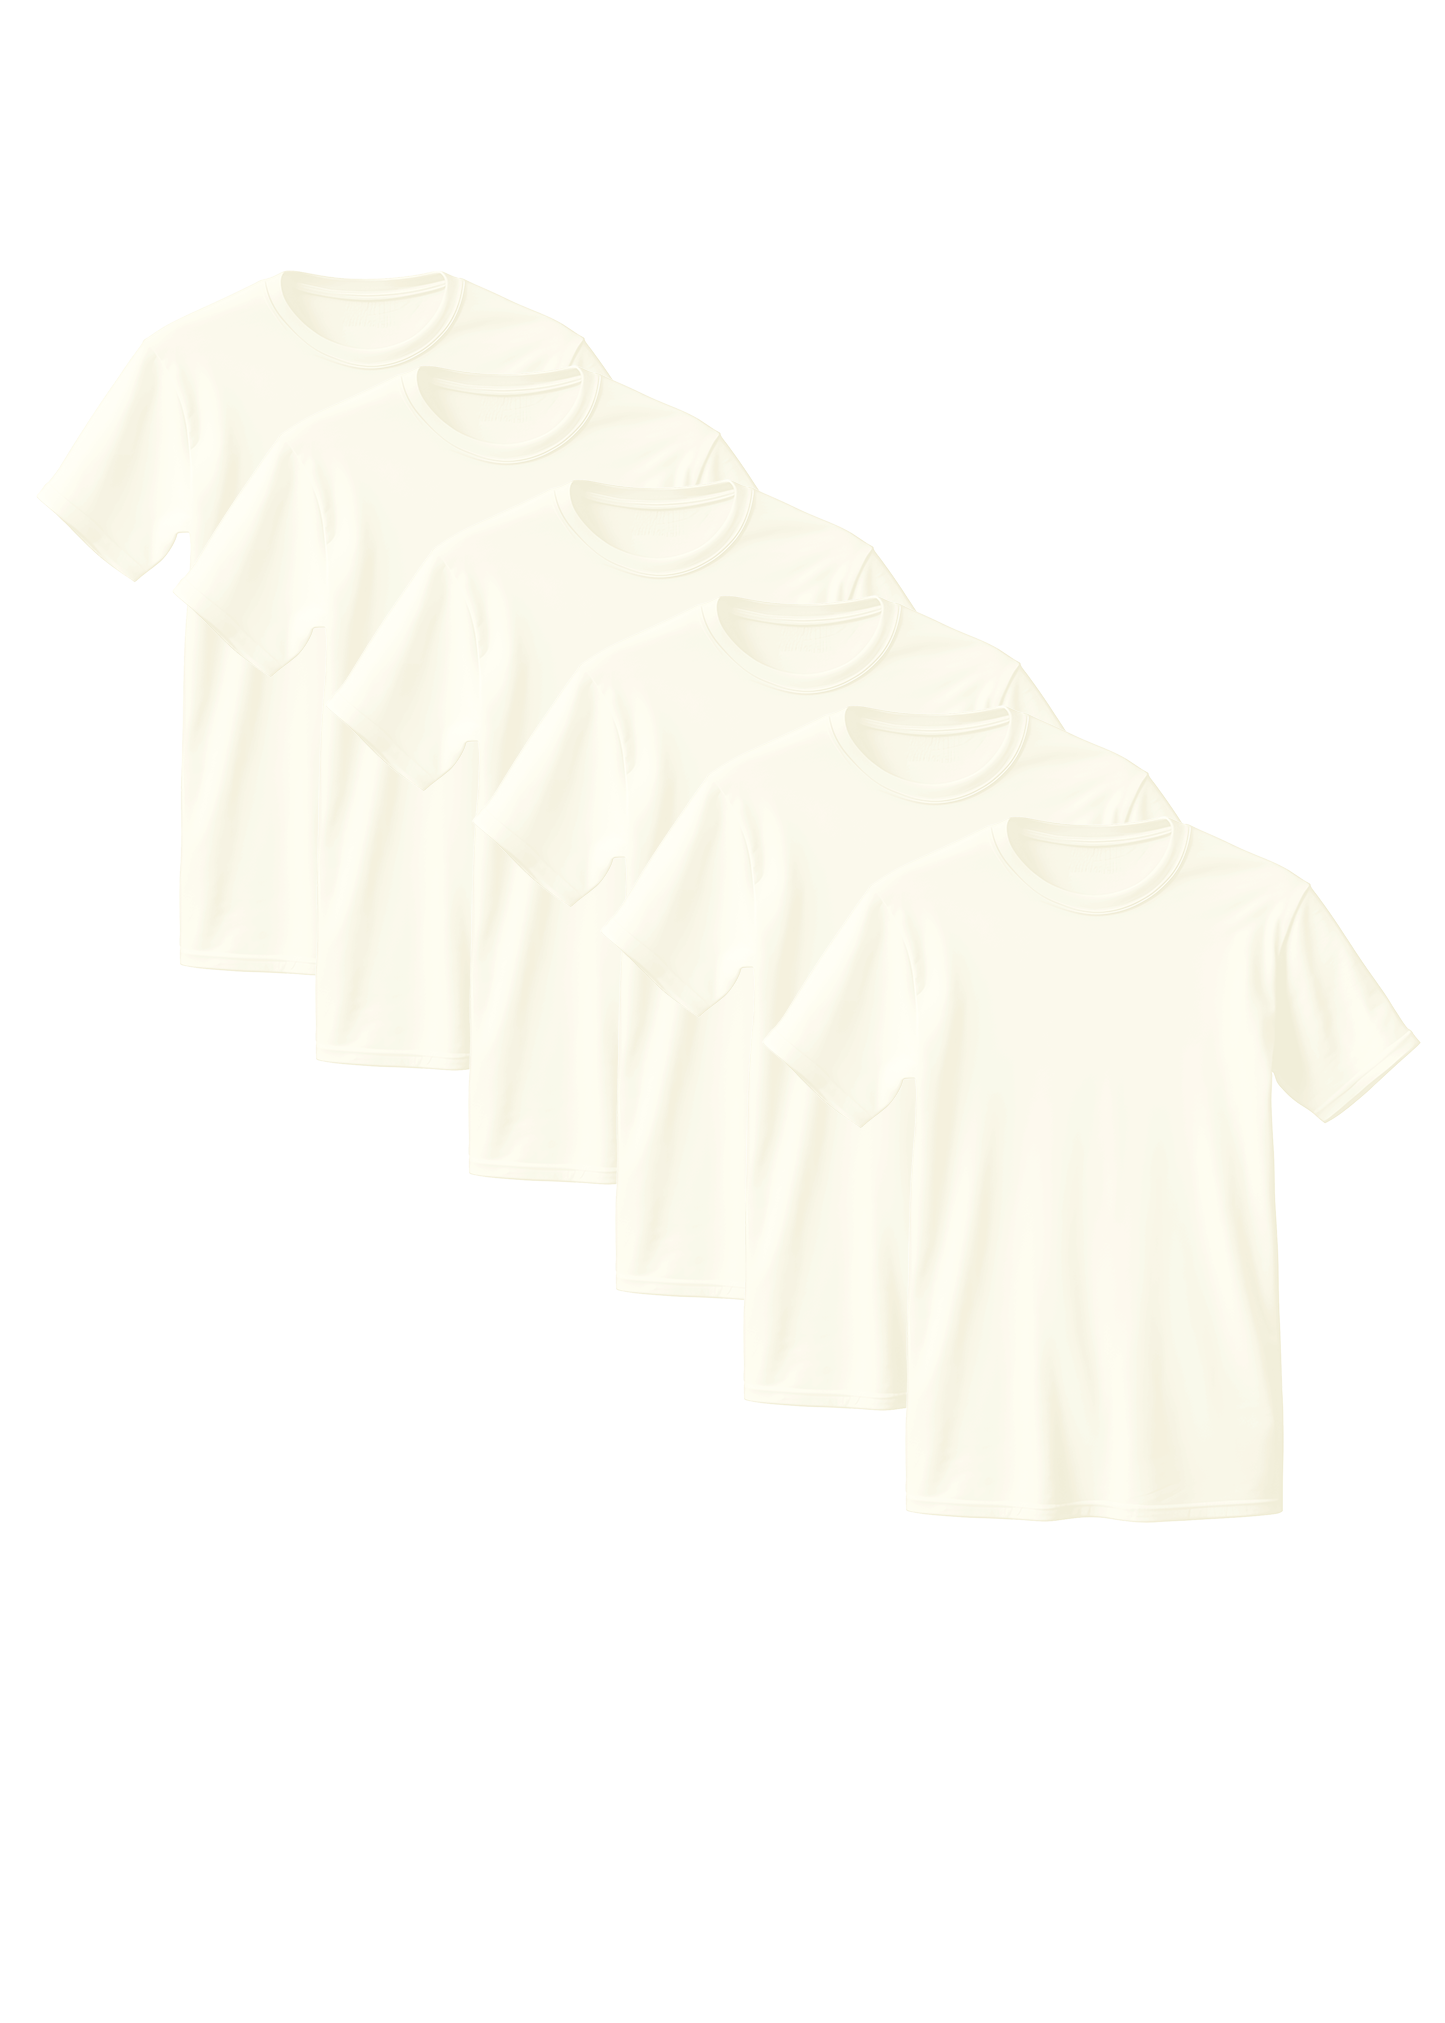 Off-White Combed Cotton T-Shirt 6-Pack